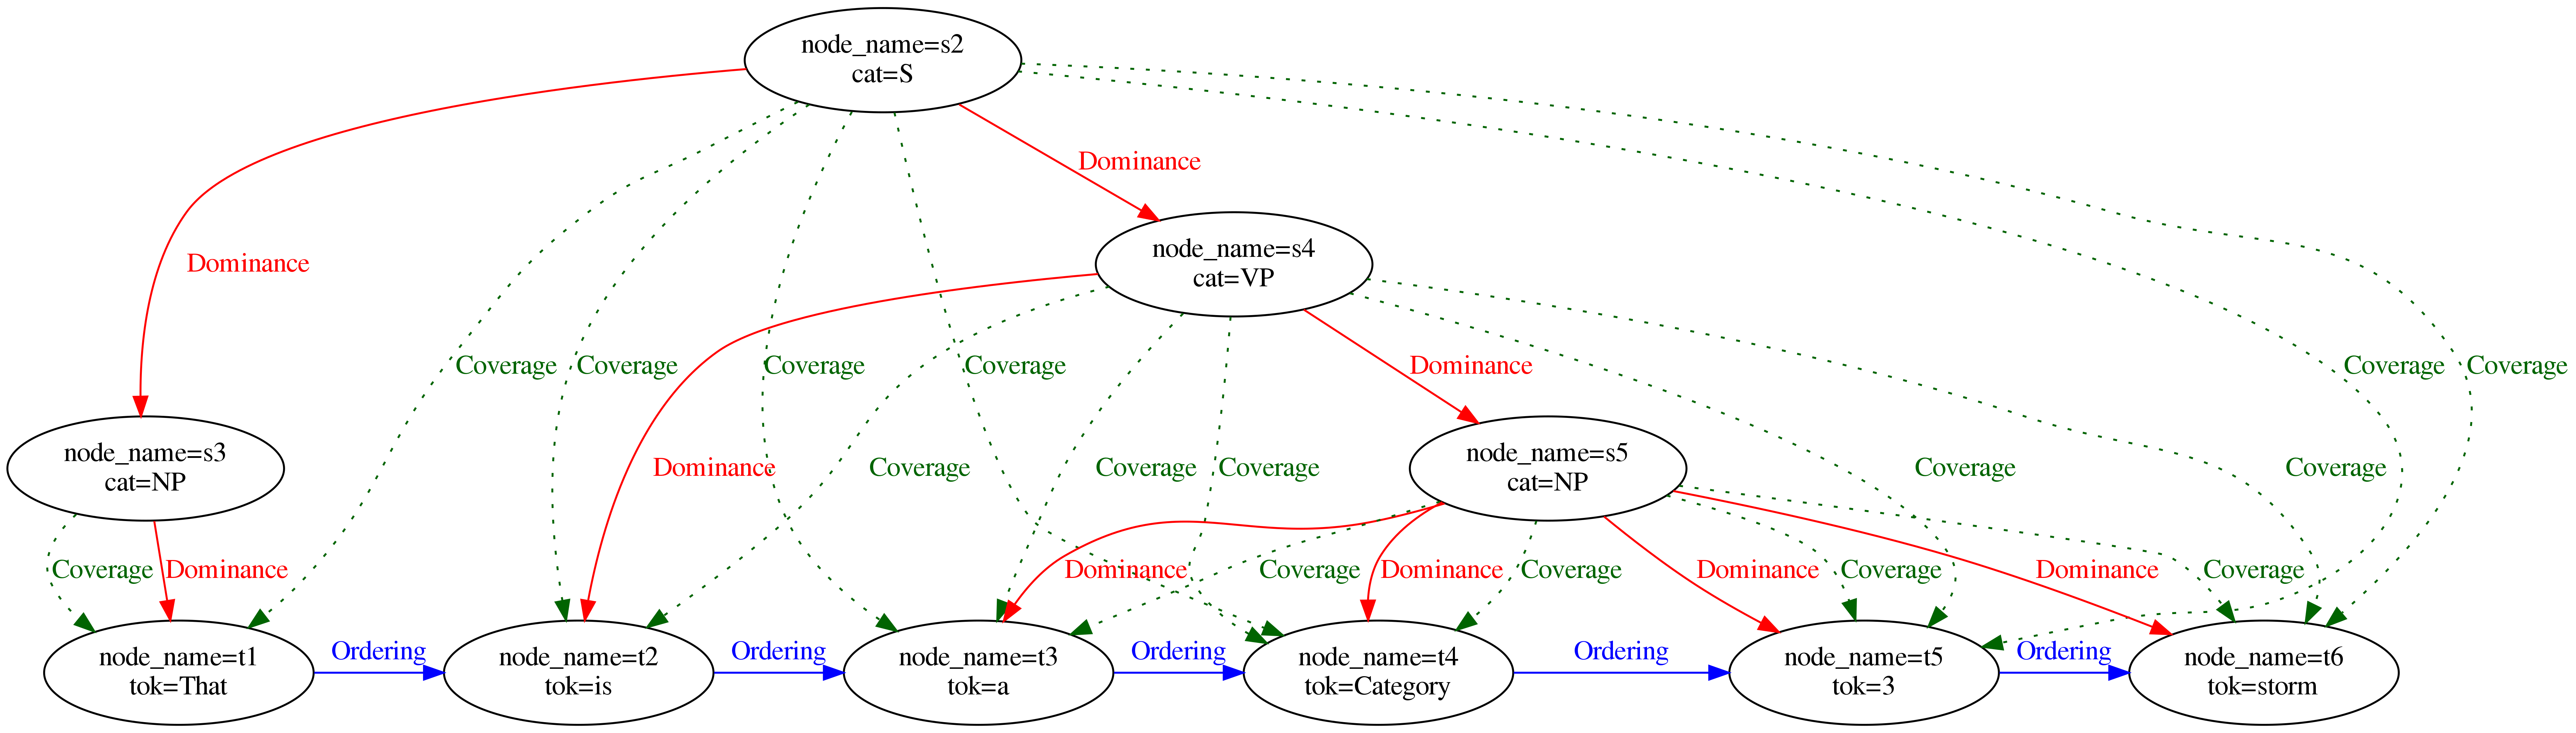 Example of inherited coverage edges for a constituent tree